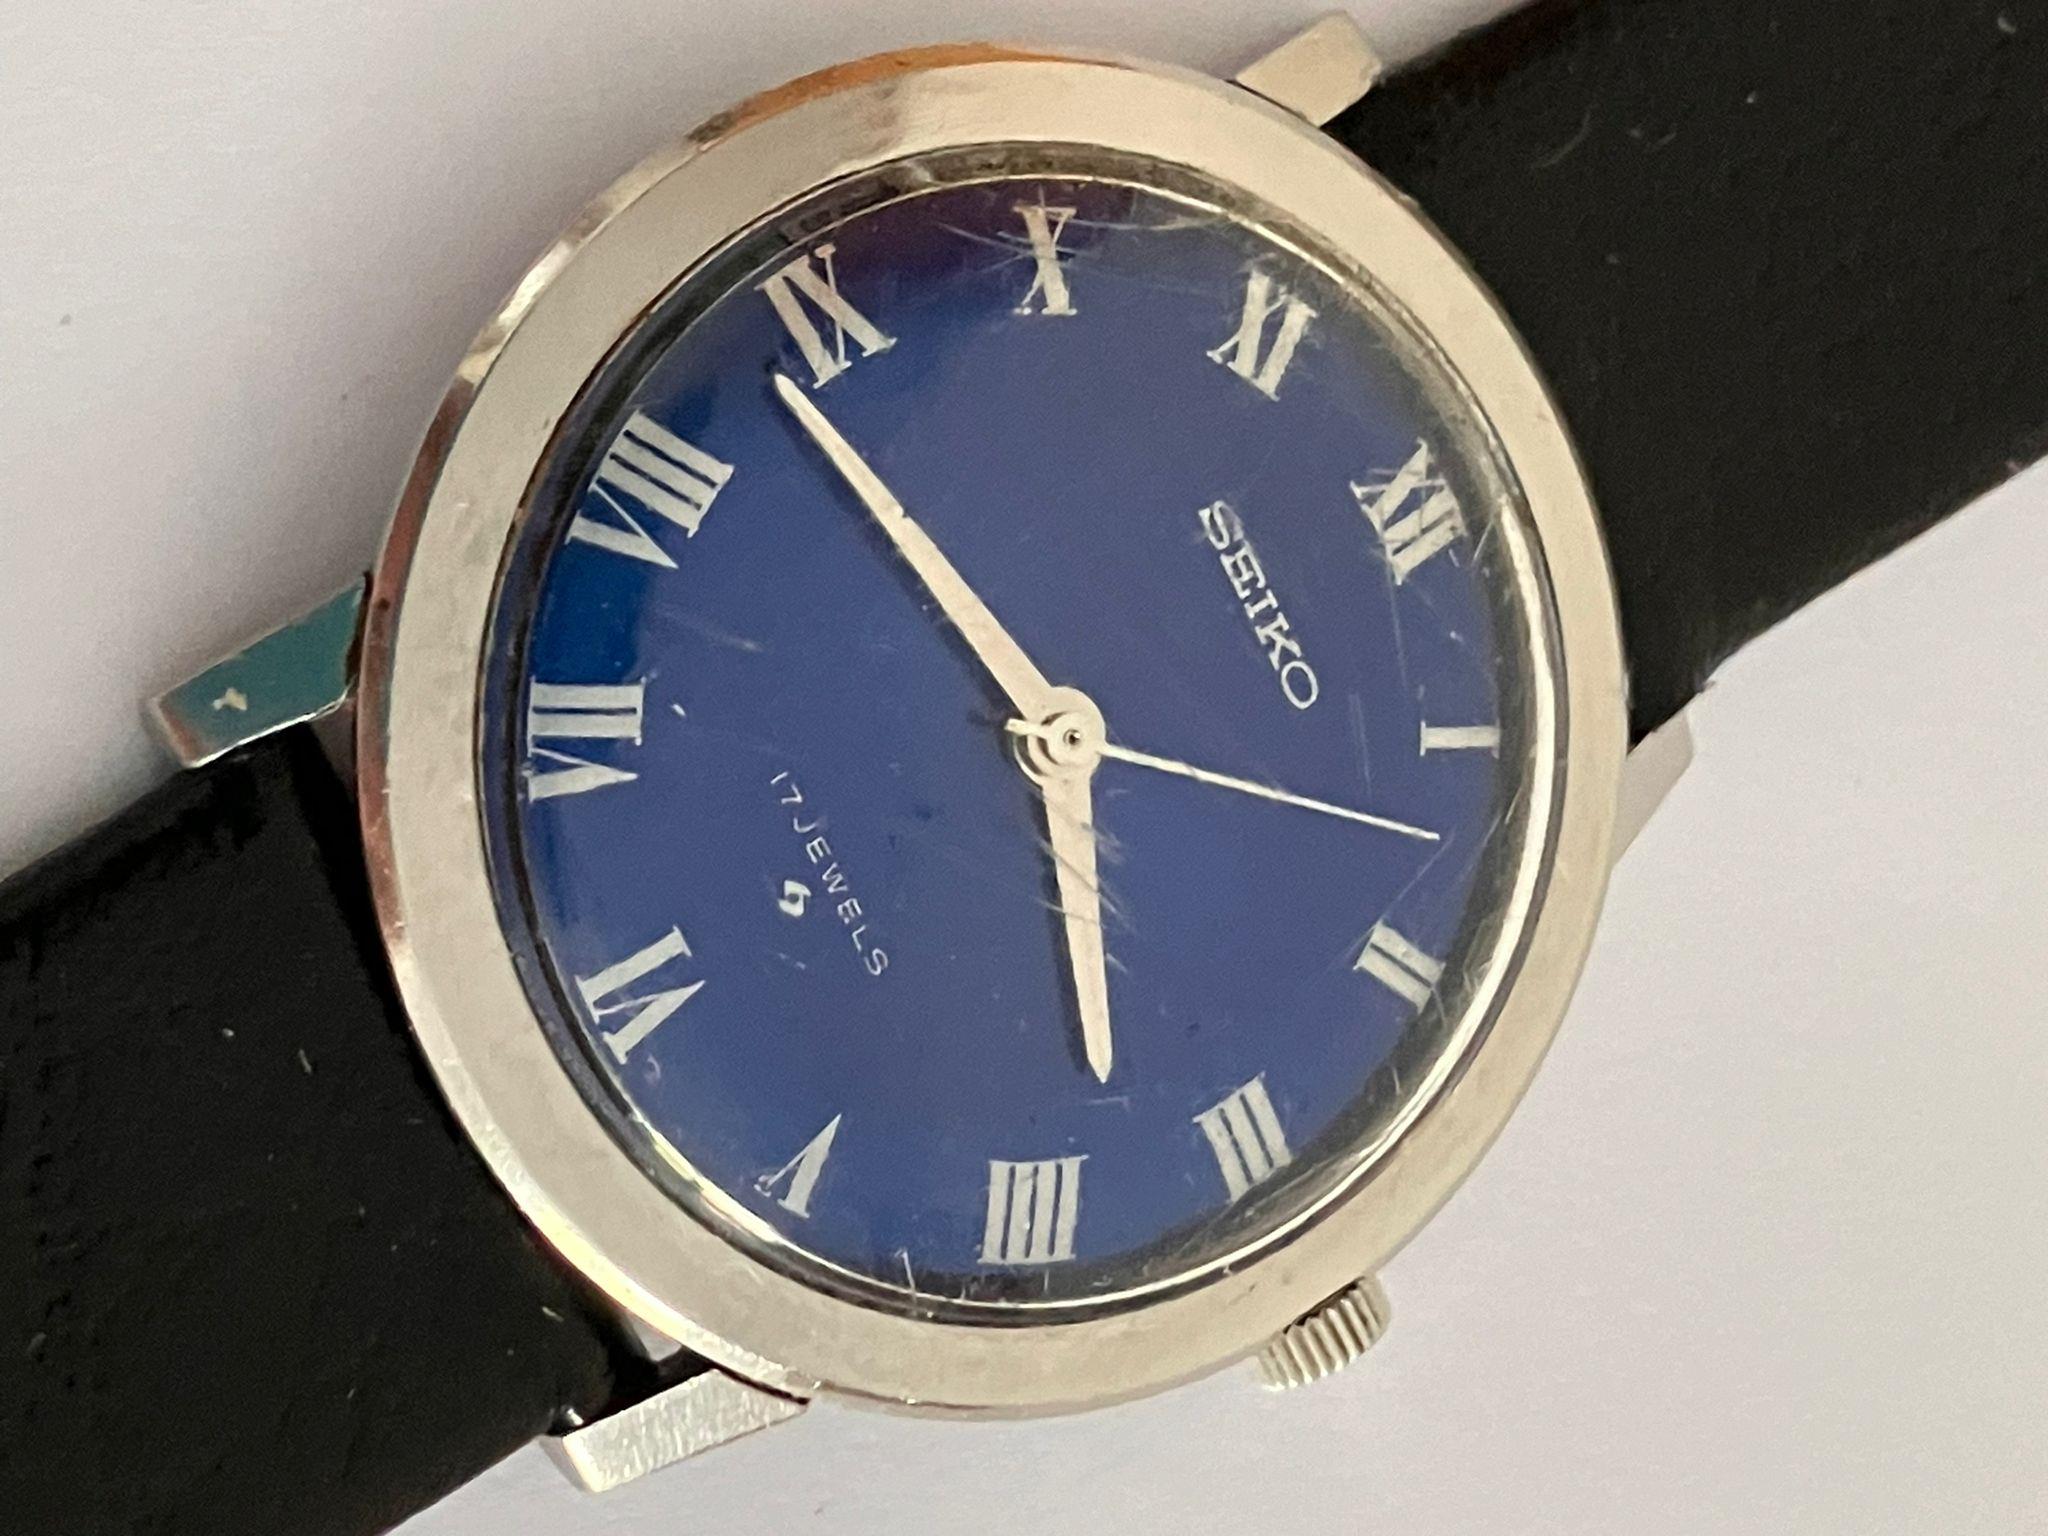 Gentlemans vintage SEIKO 66- 7090 wristwatch. Blue Face Model with Roman numerals. Manual winding in - Image 3 of 5